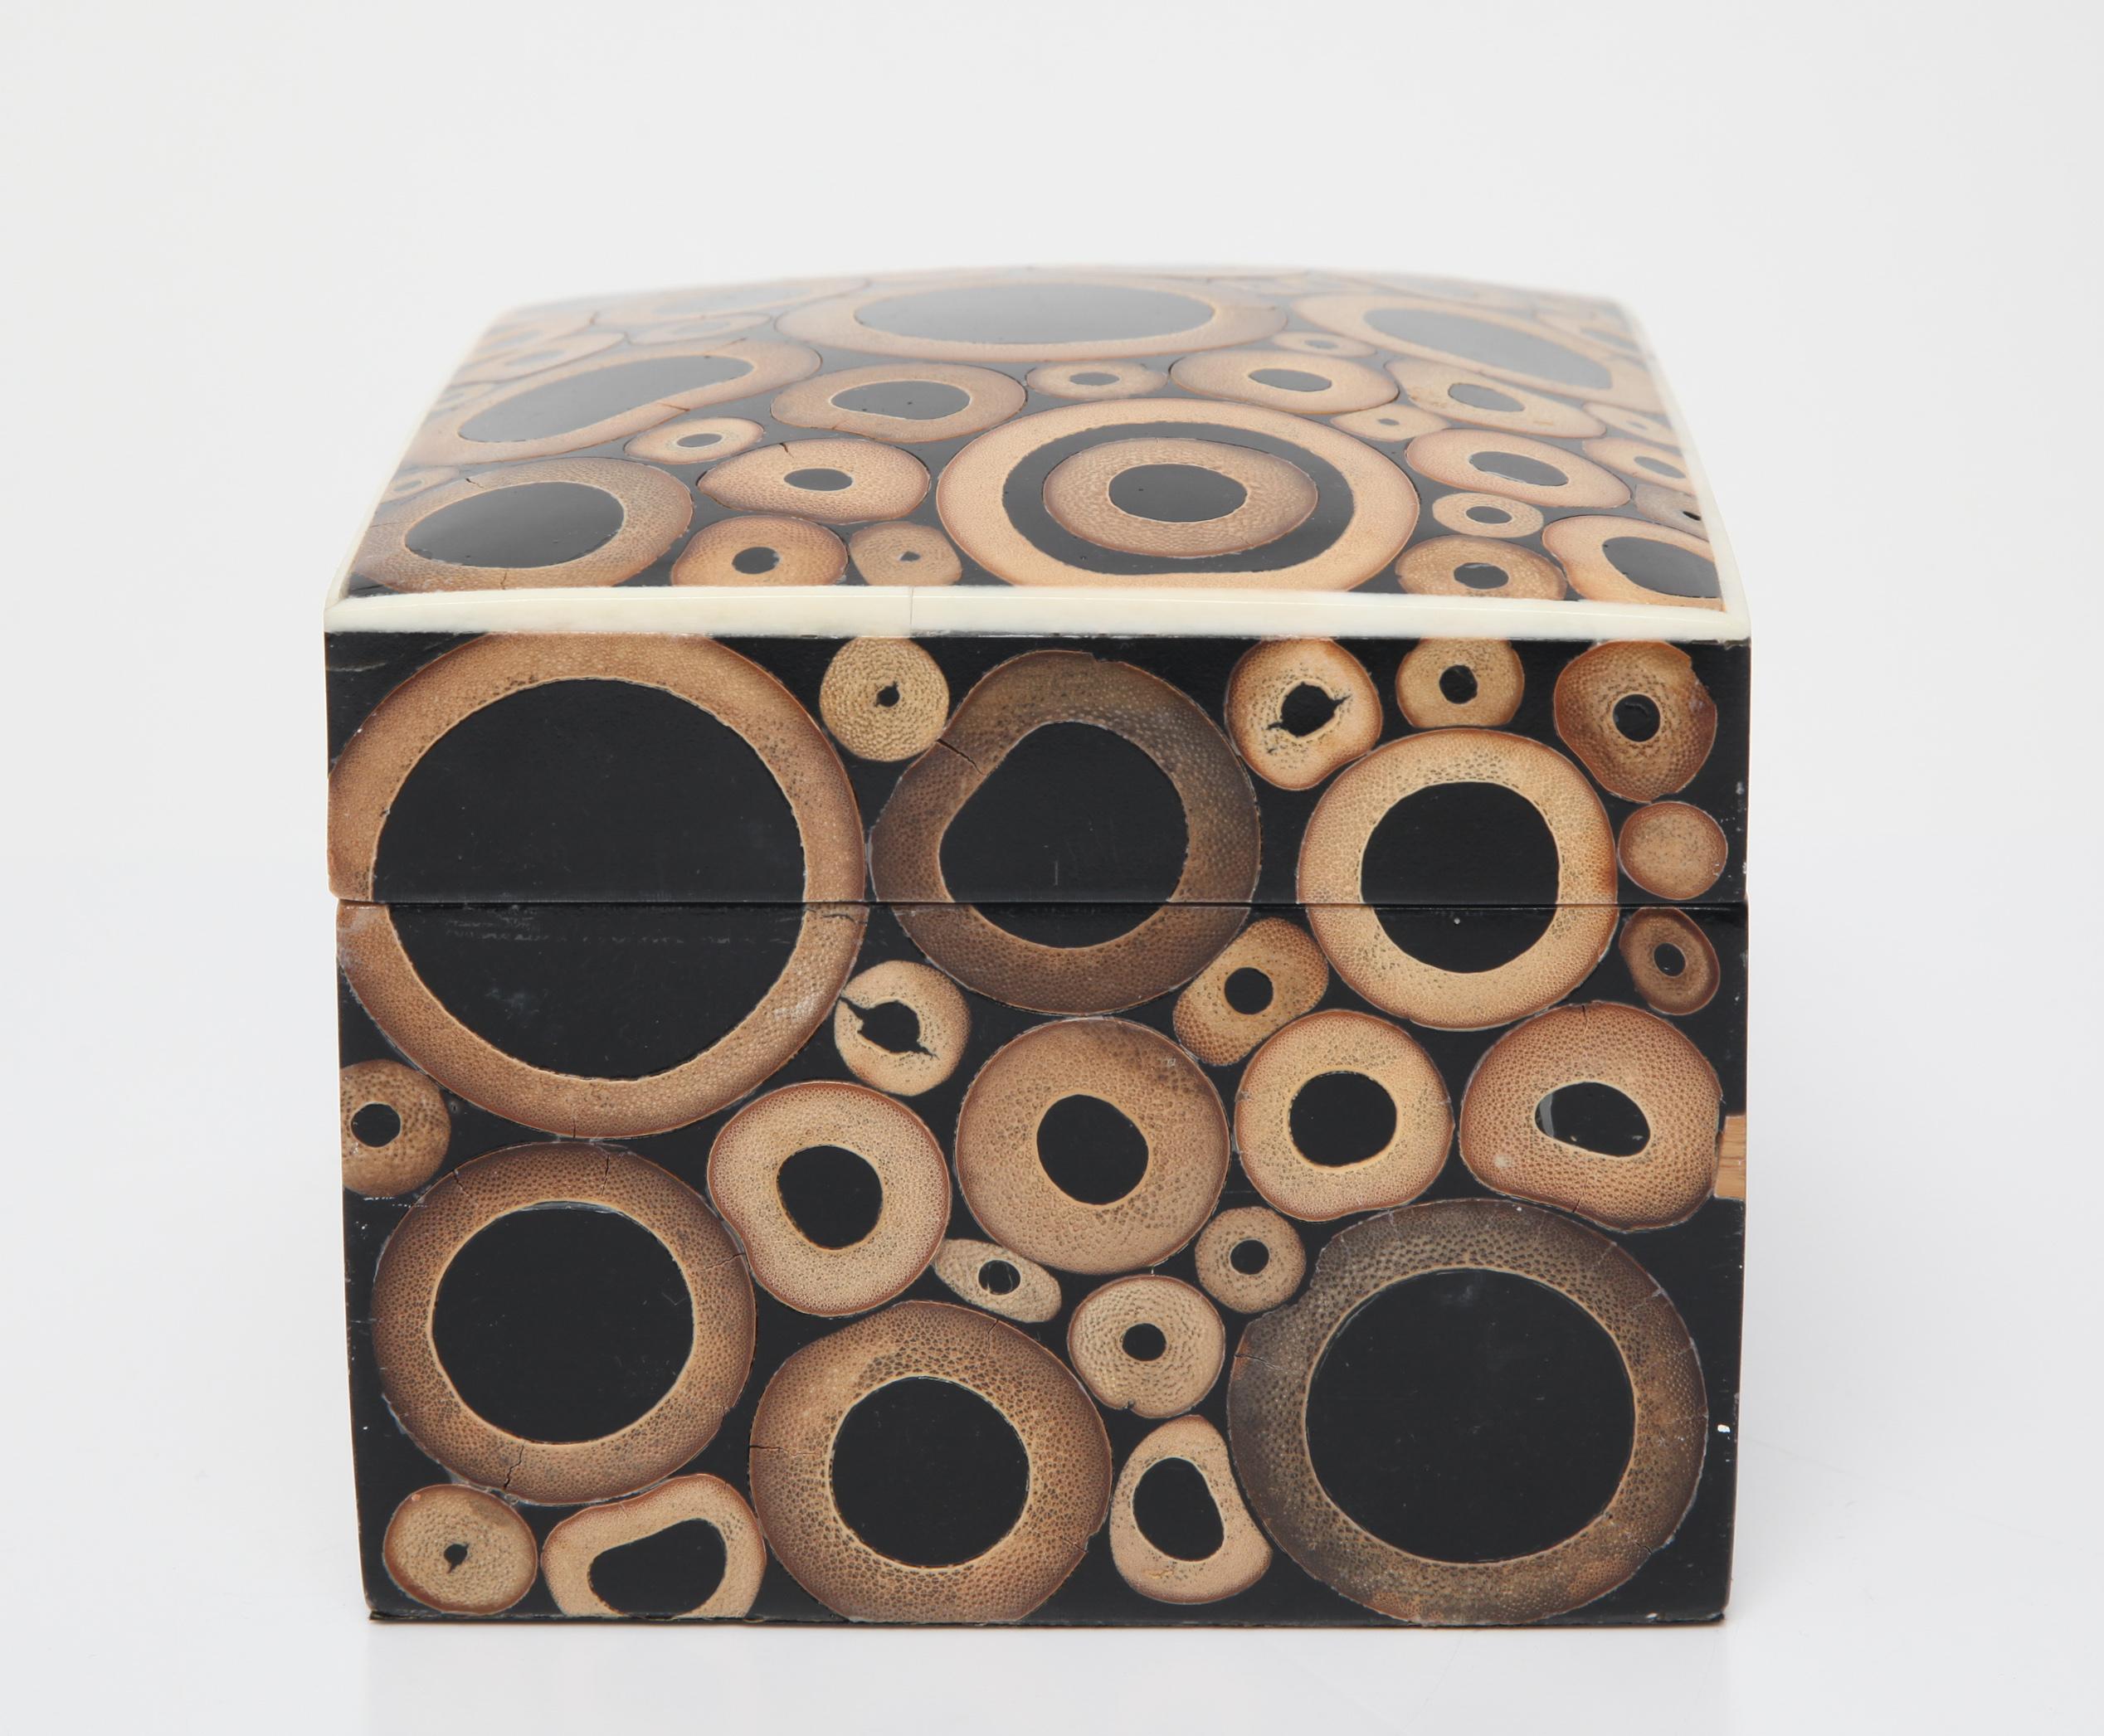 French Modern wood box with a bamboo inlay and ebonized wood, designed by R & Y Augosti. The piece is marked to the underside